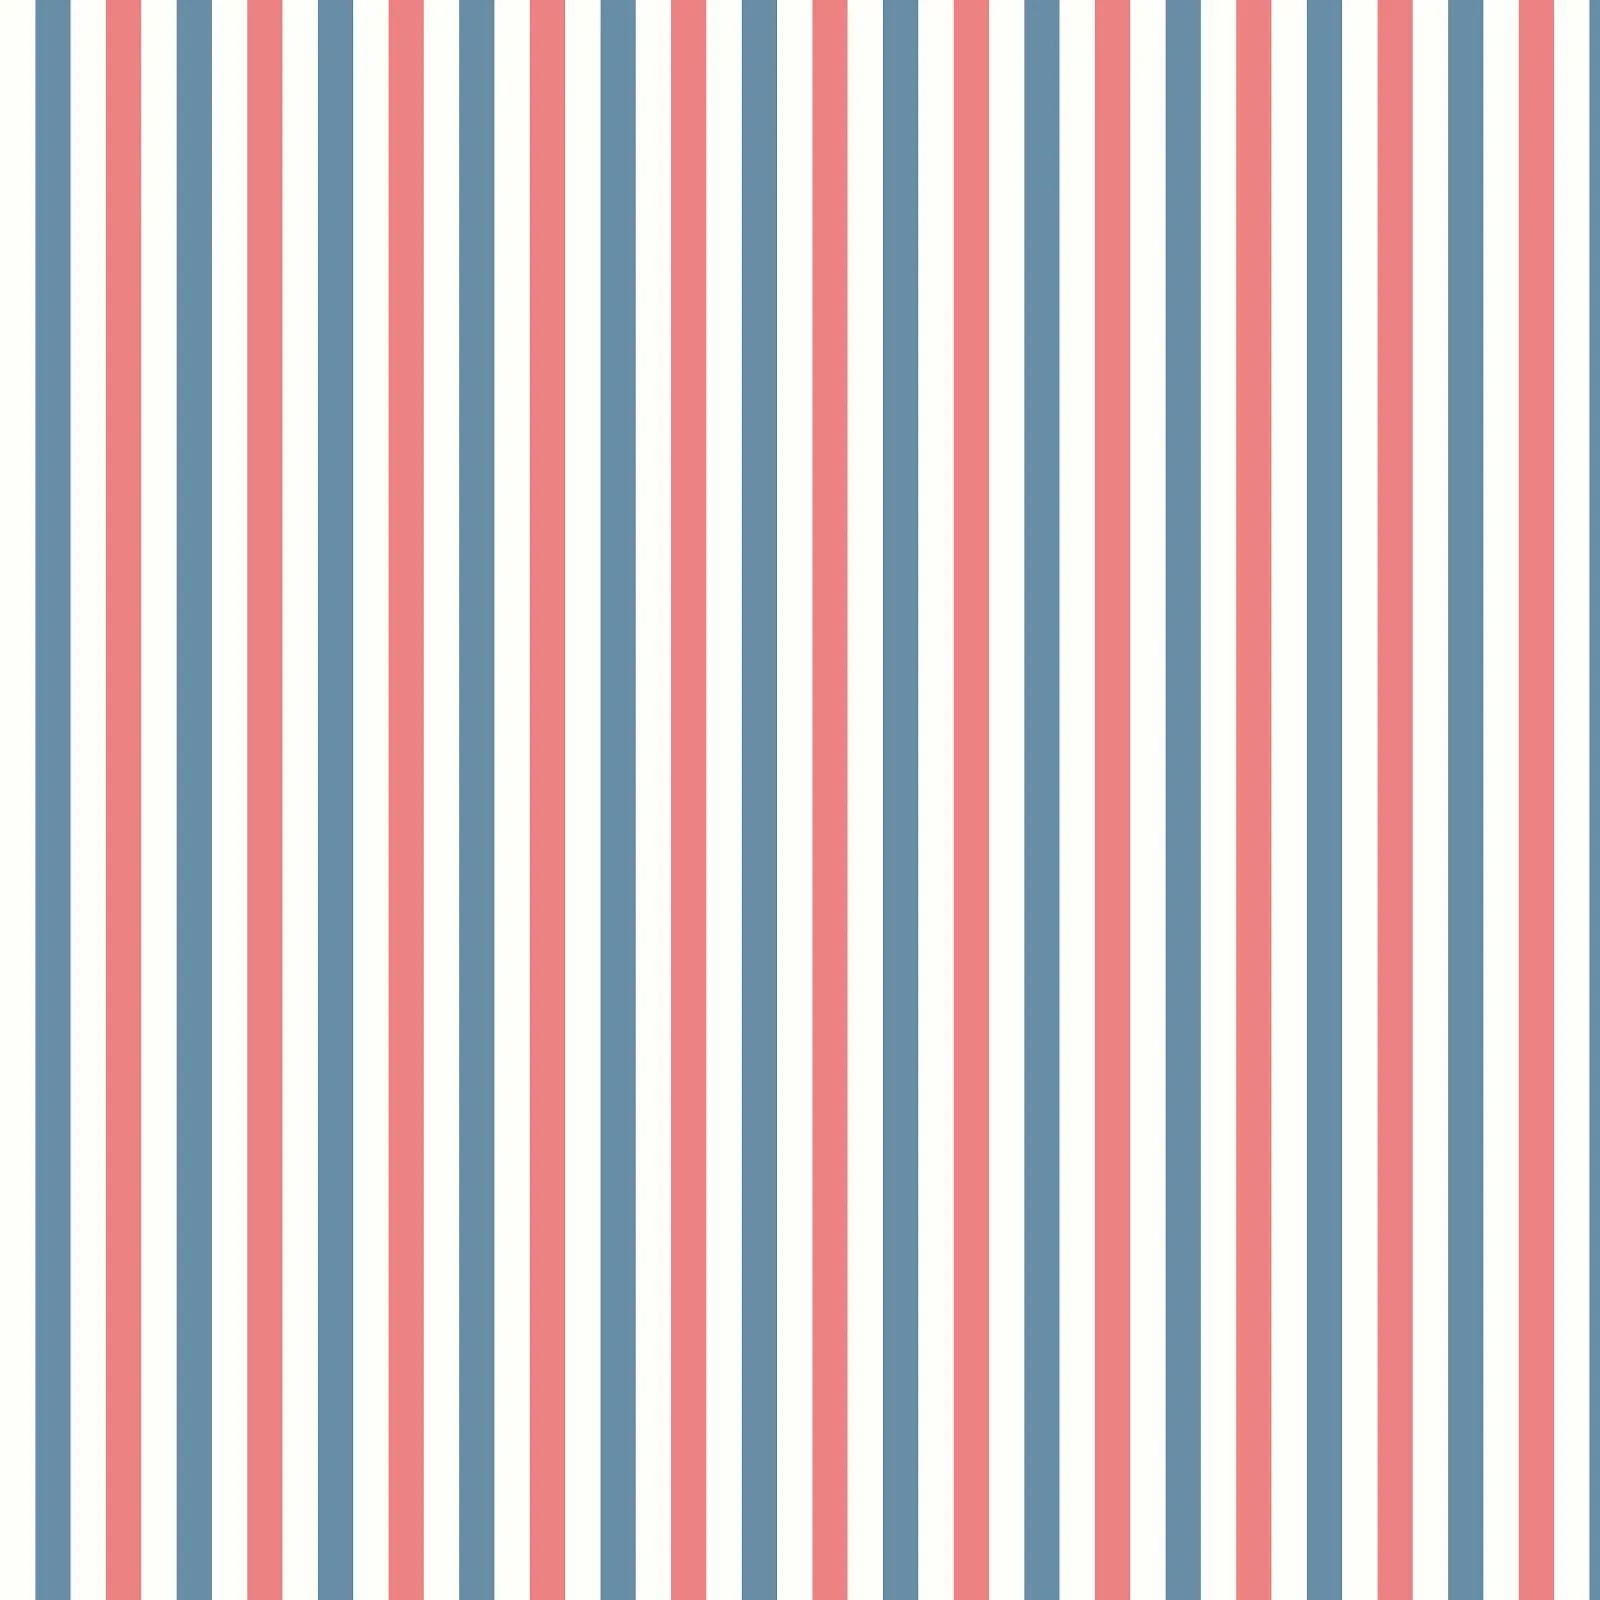 Stampin D'Amour: Free Digital Scrapbook Paper - Red White and Blue ...